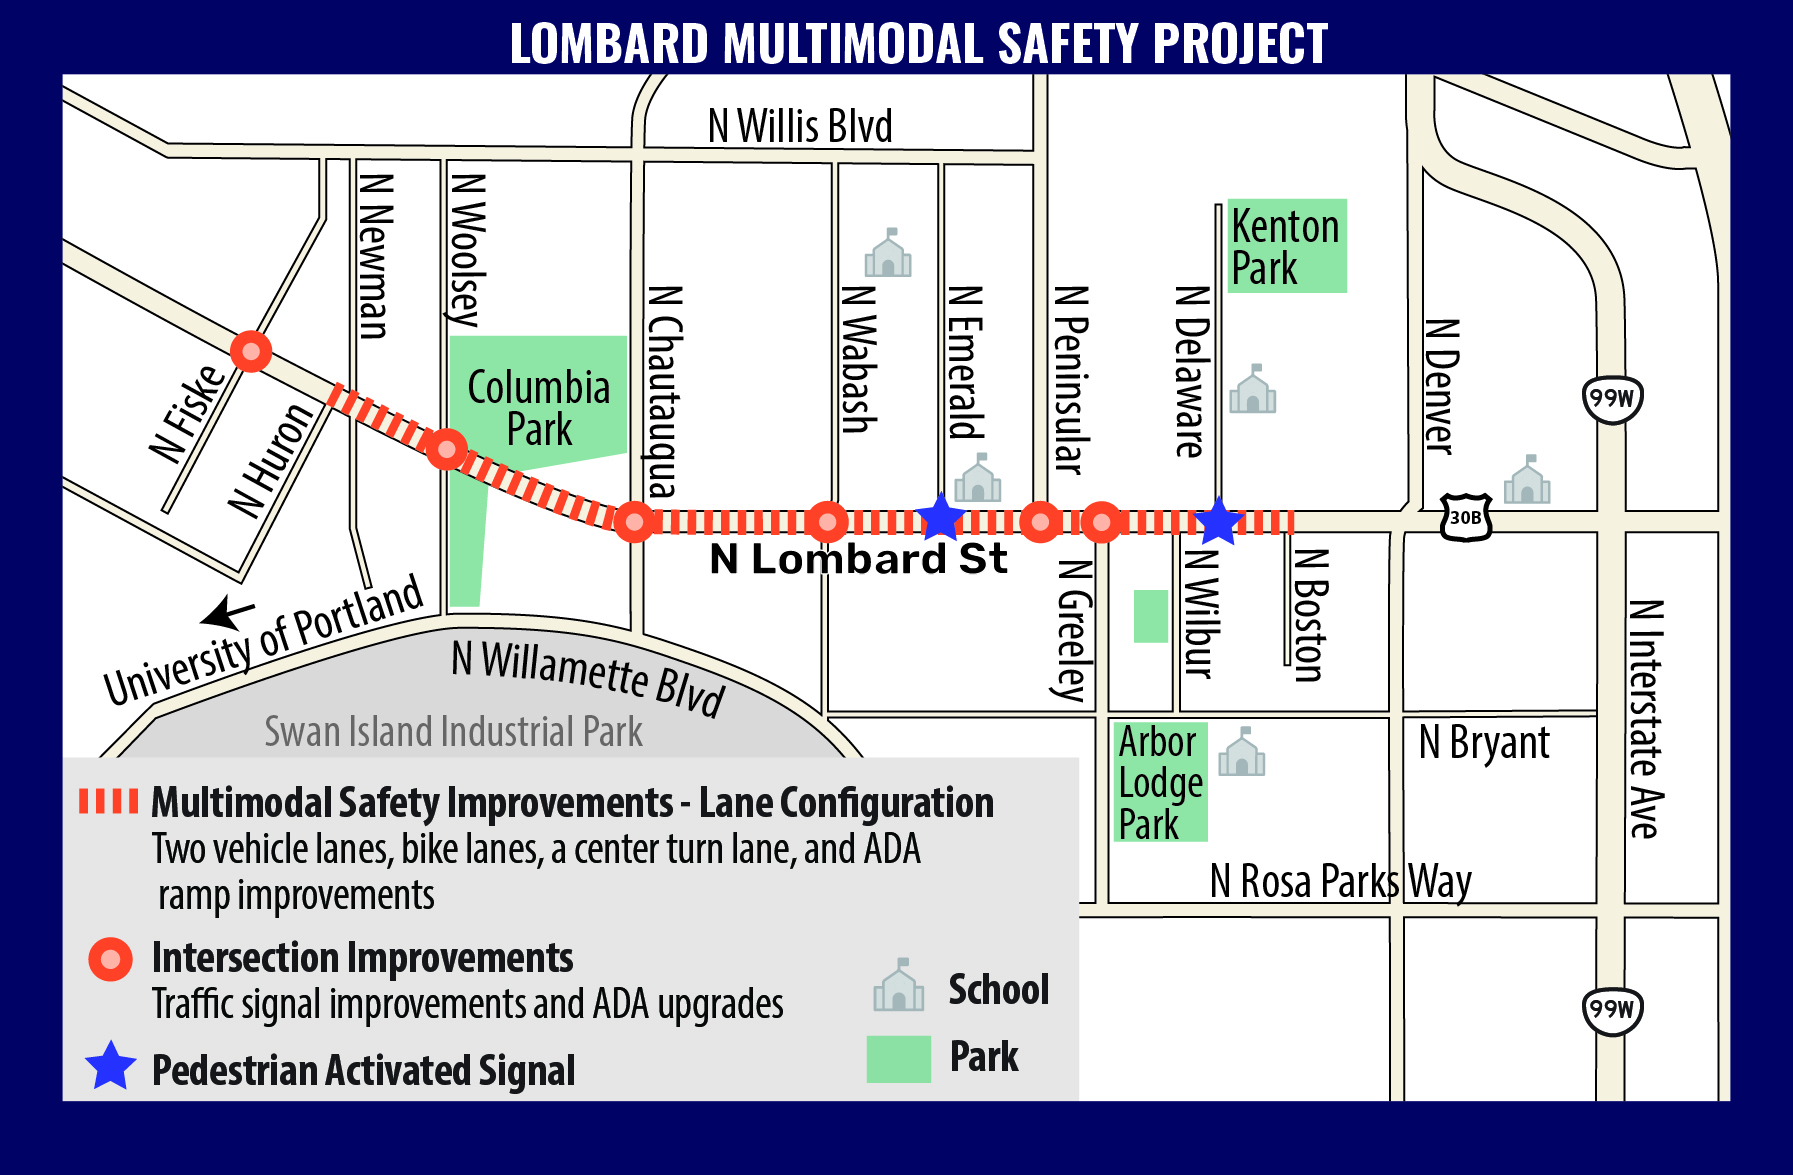 Lombard Multimodal Safety Project map